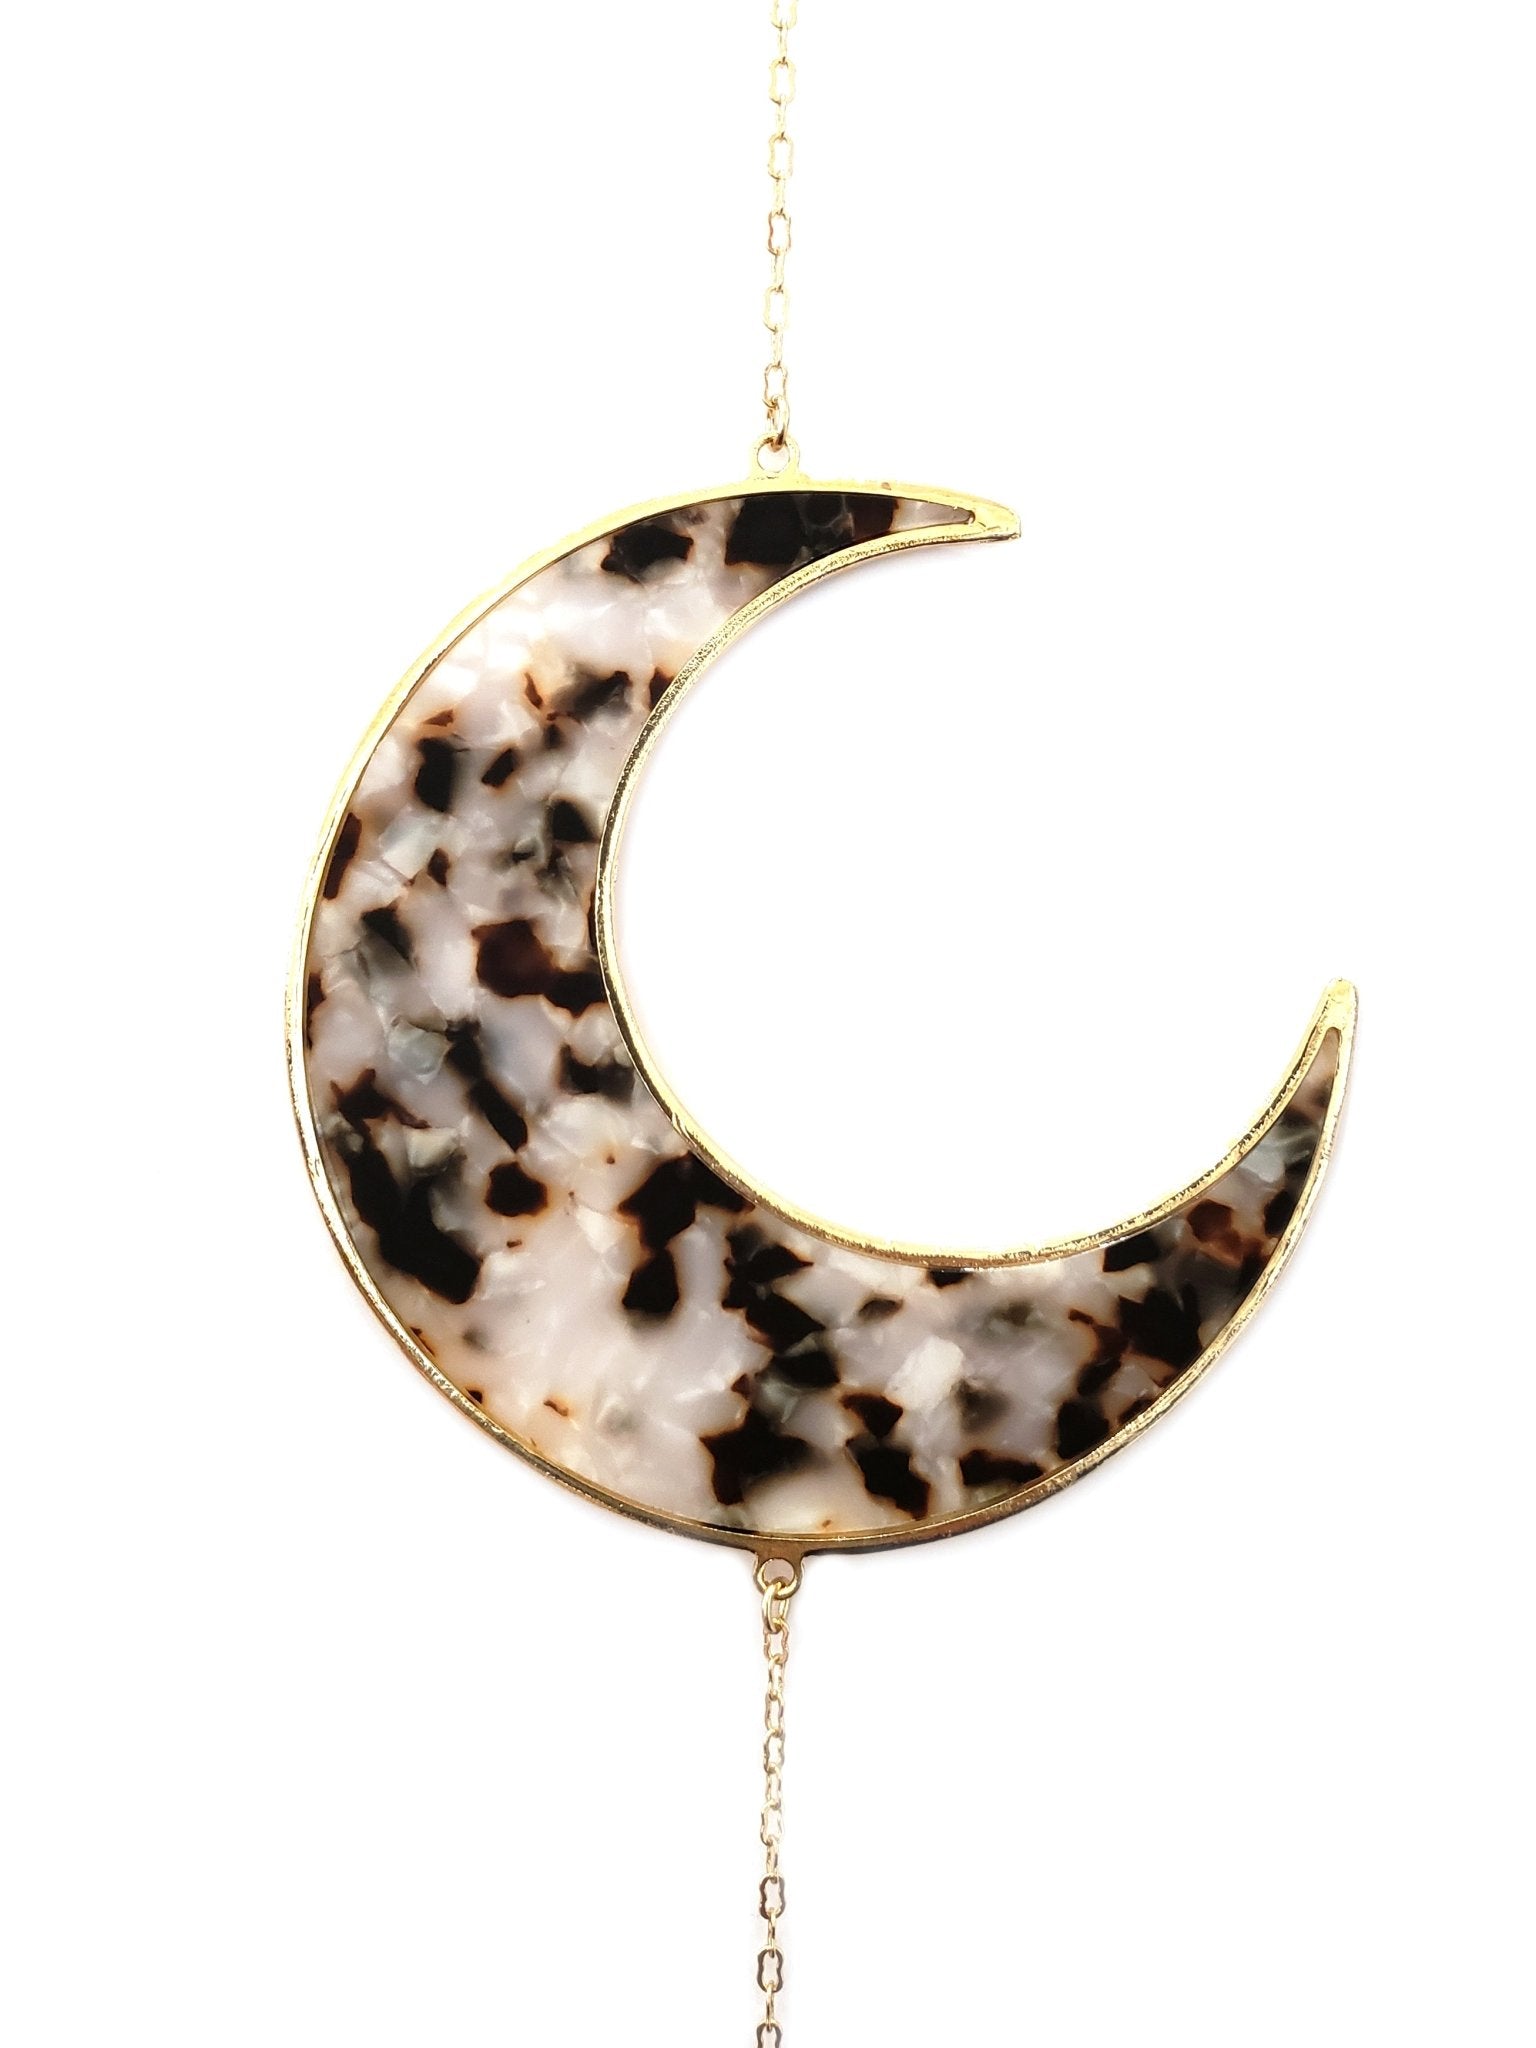 Resin Moon Phase Wall Hanging - Ariana Ost